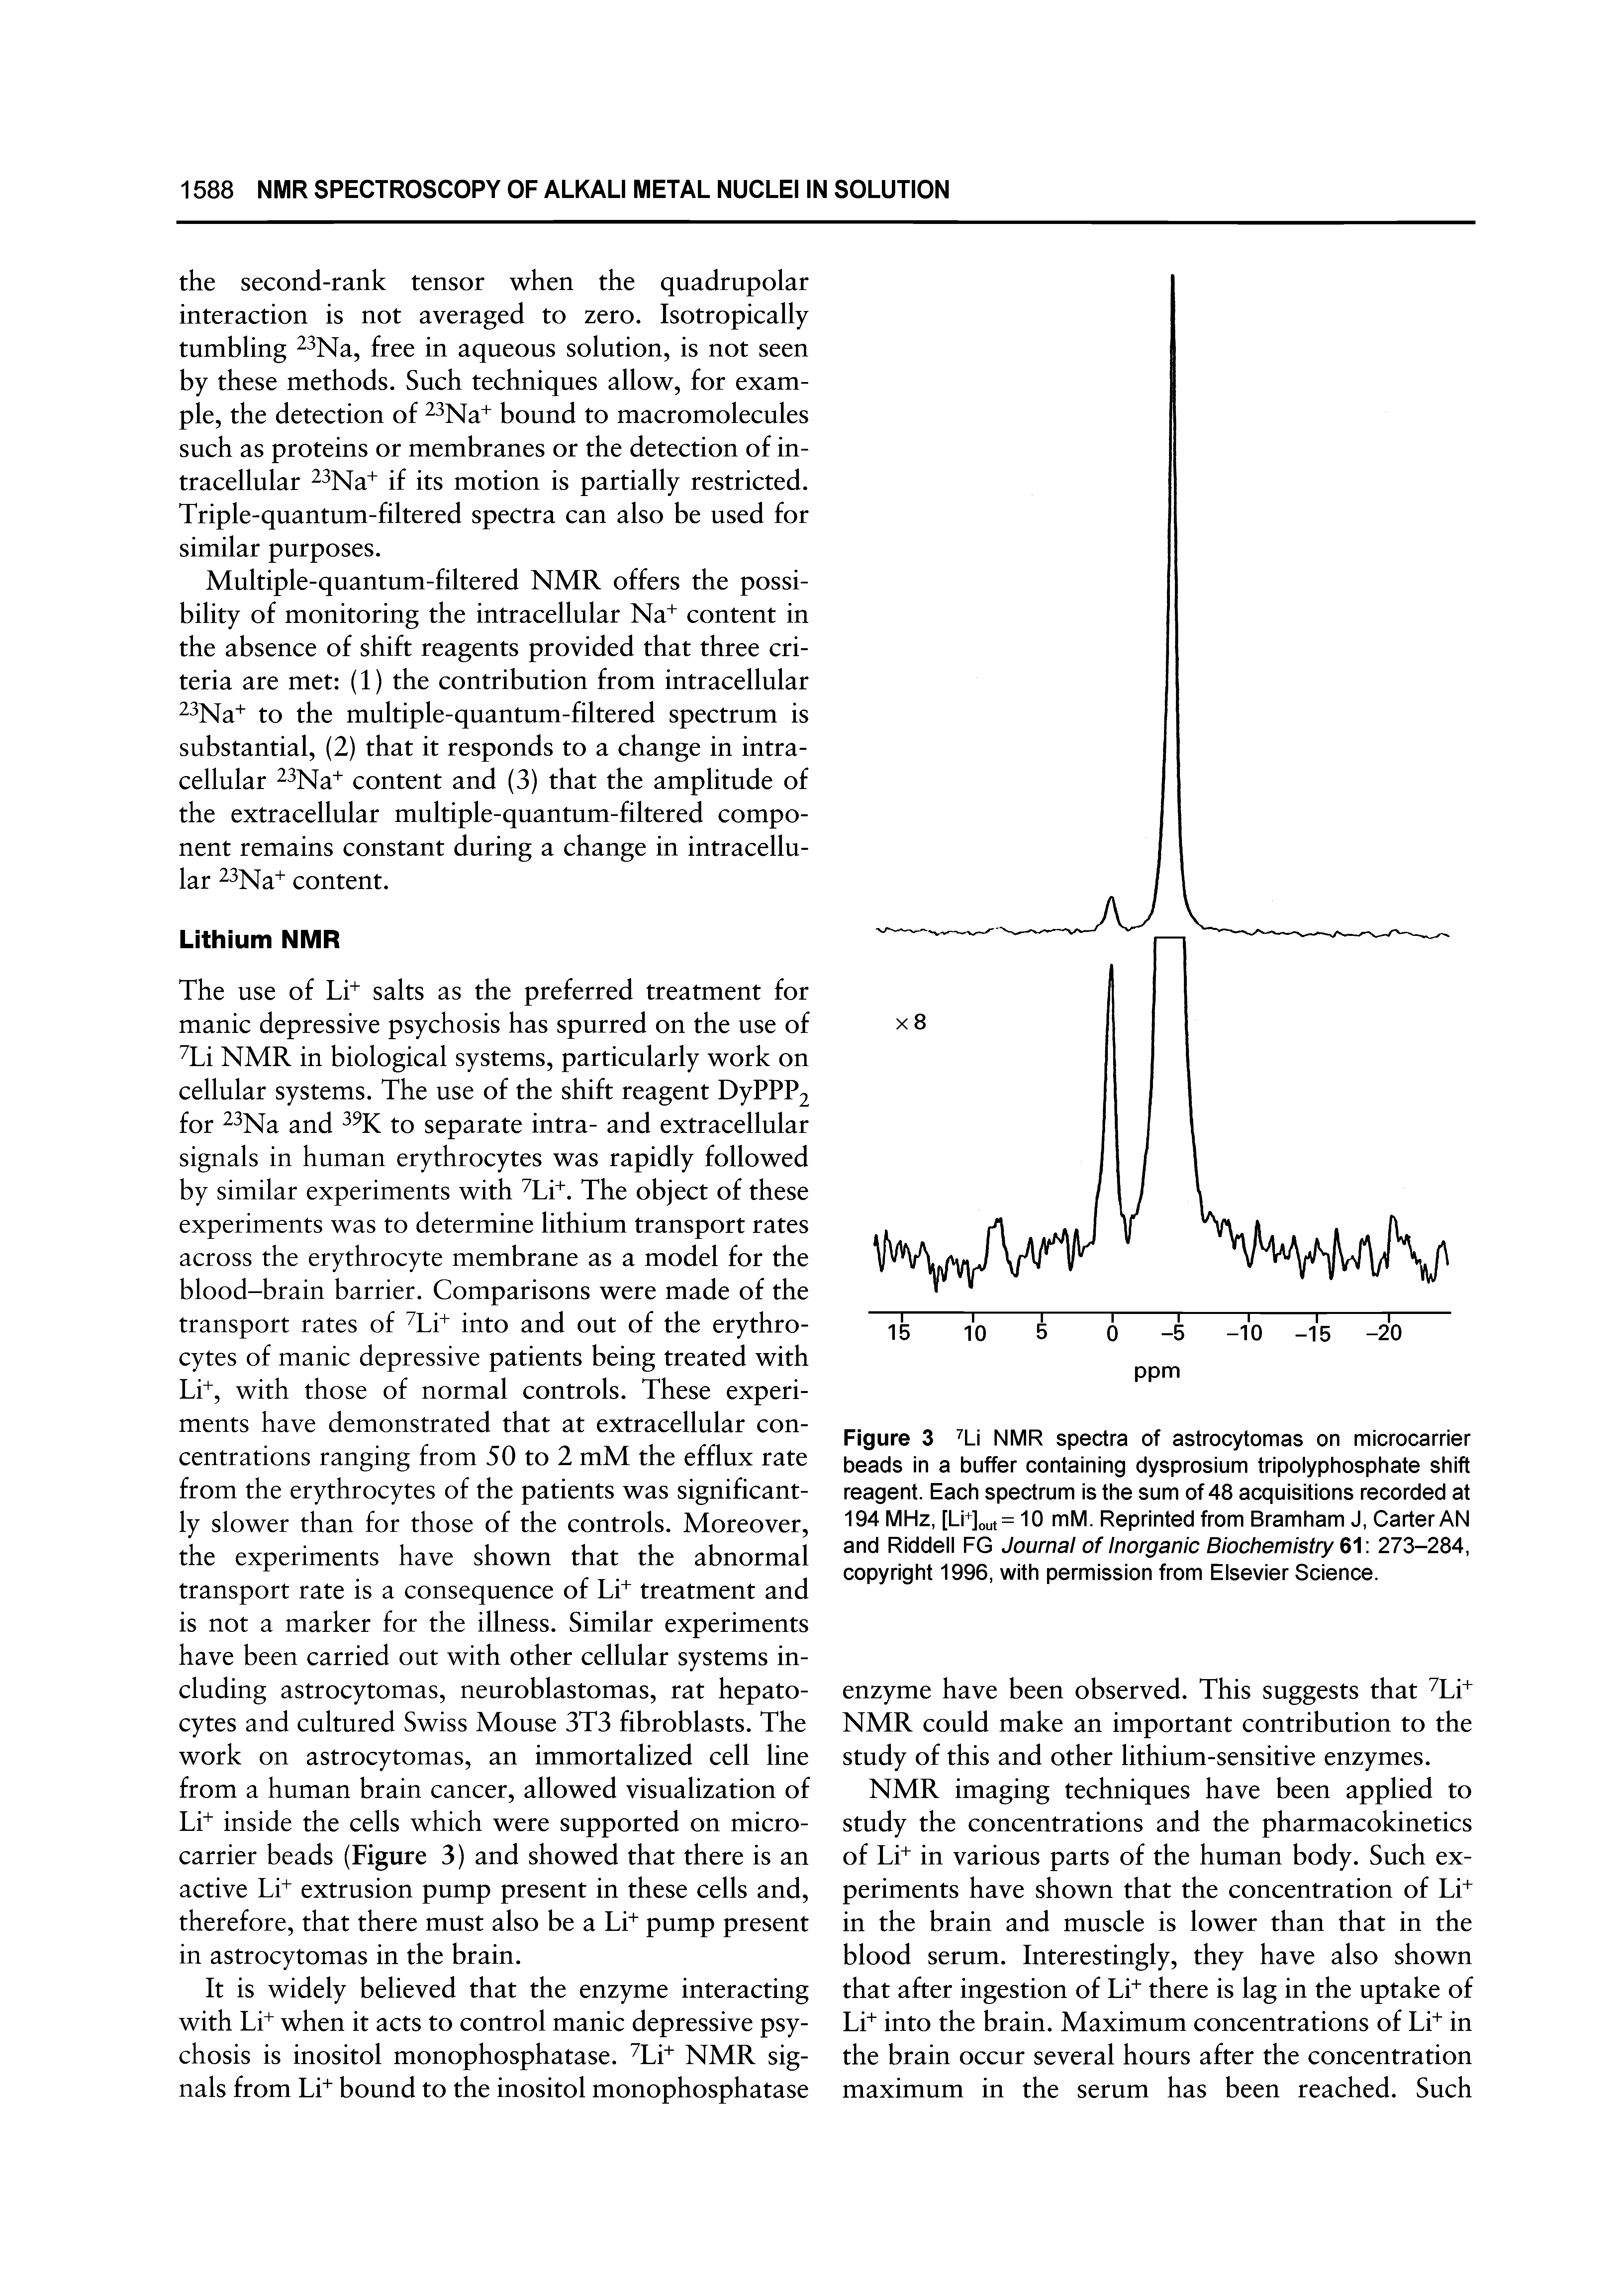 Figure 3 Li NMR spectra of astrocytomas on microcarrier beads in a buffer containing dysprosium tripolyphosphate shift reagent. Each spectrum is the sum of 48 acquisitions recorded at 194 MHz, [Li+]out= 10 Reprinted from Bramham J, Carter AN and Riddell FG Journal of Inorganic Biochemistry 273-284, copyright 1996, with permission from Elsevier Science.